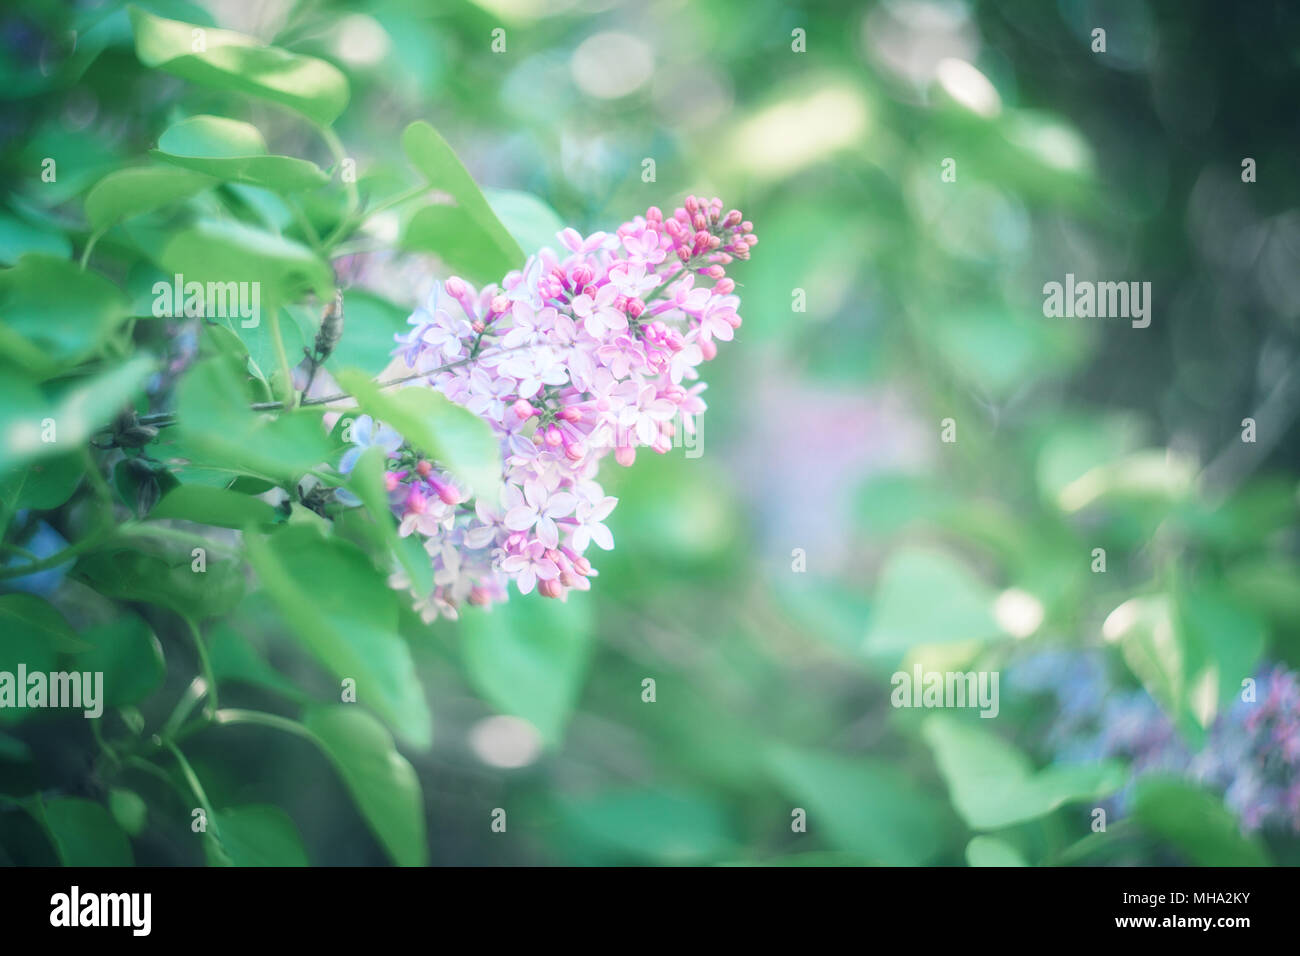 Green branch with spring lilac flowers. Beautiful nature background. Stock Photo